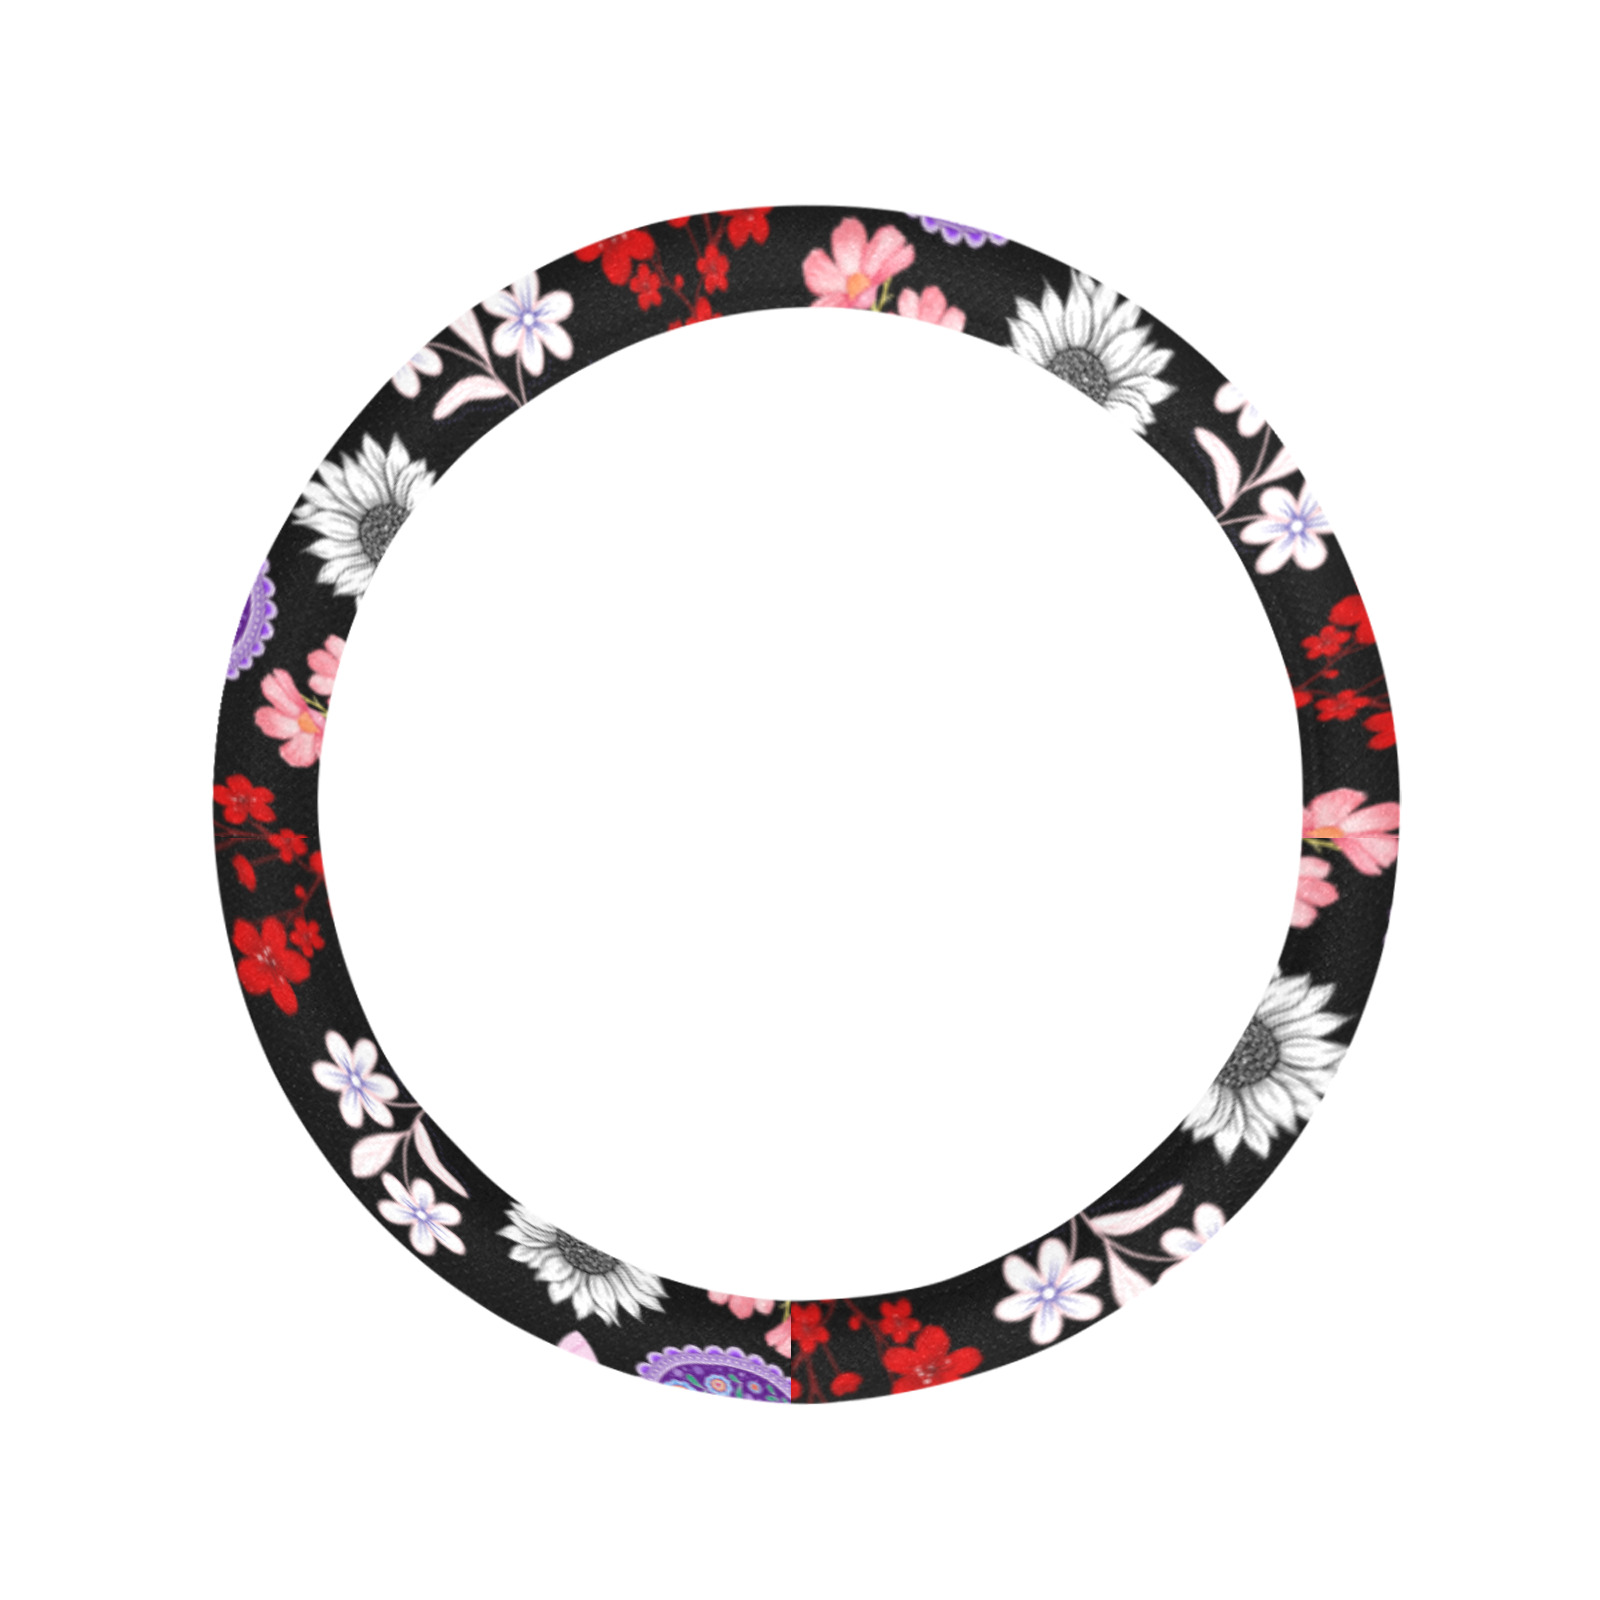 Black, Red, Pink, Purple, Dragonflies, Butterfly and Flowers Design Steering Wheel Cover with Anti-Slip Insert